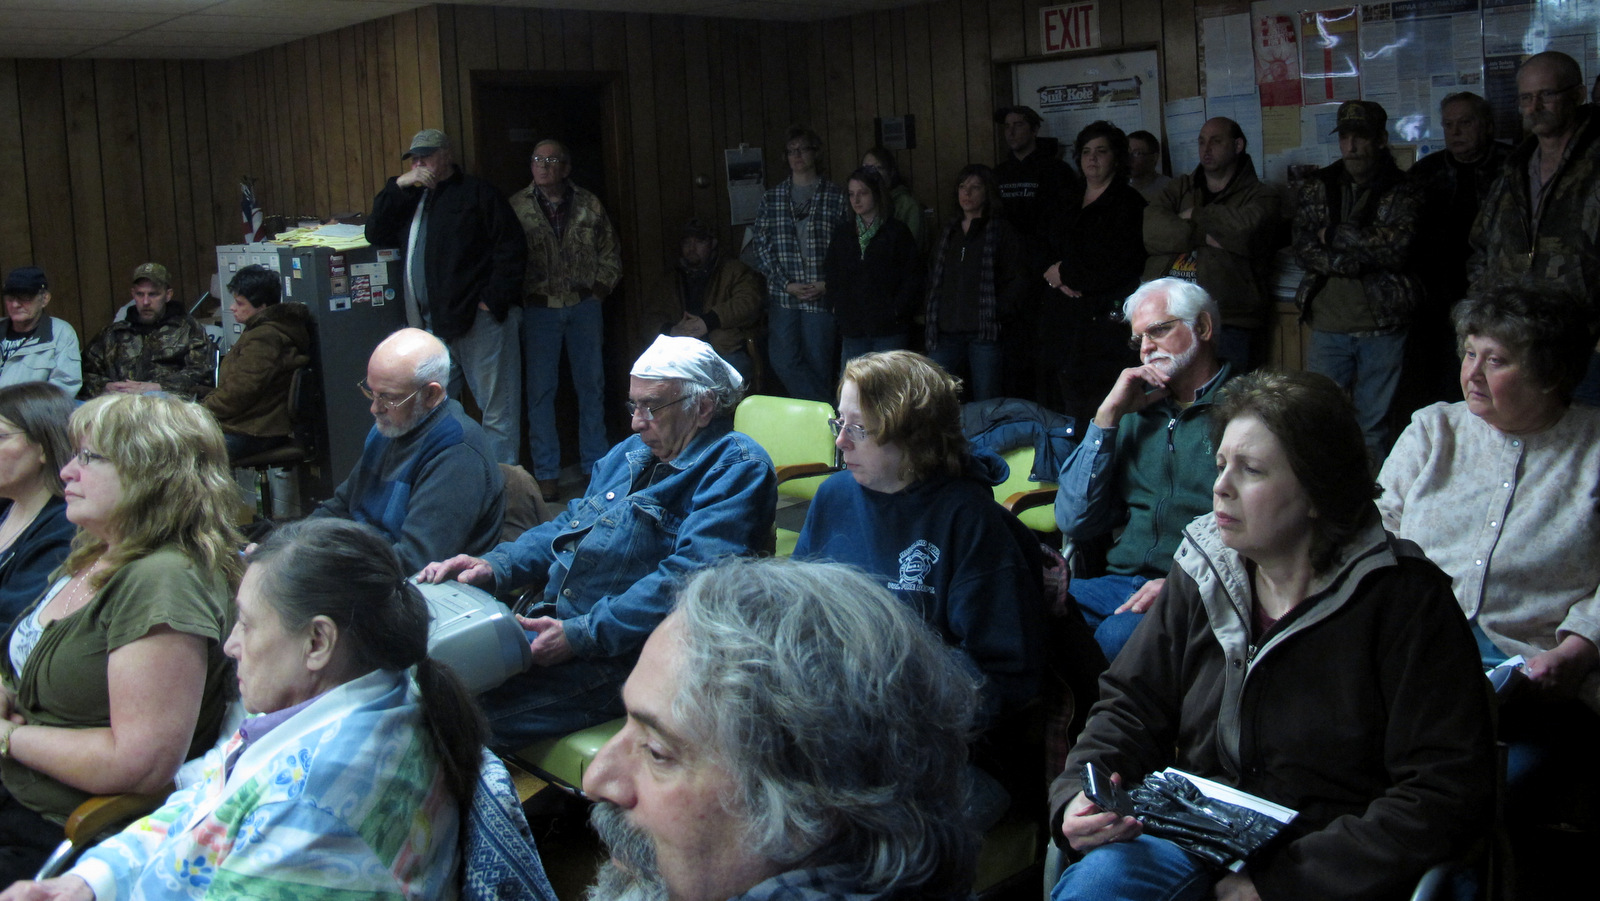 Elk County residents packed the Highland Township supervisors' meeting on Wednesday. (Photo: Katie Colaneri/State Impact PA)